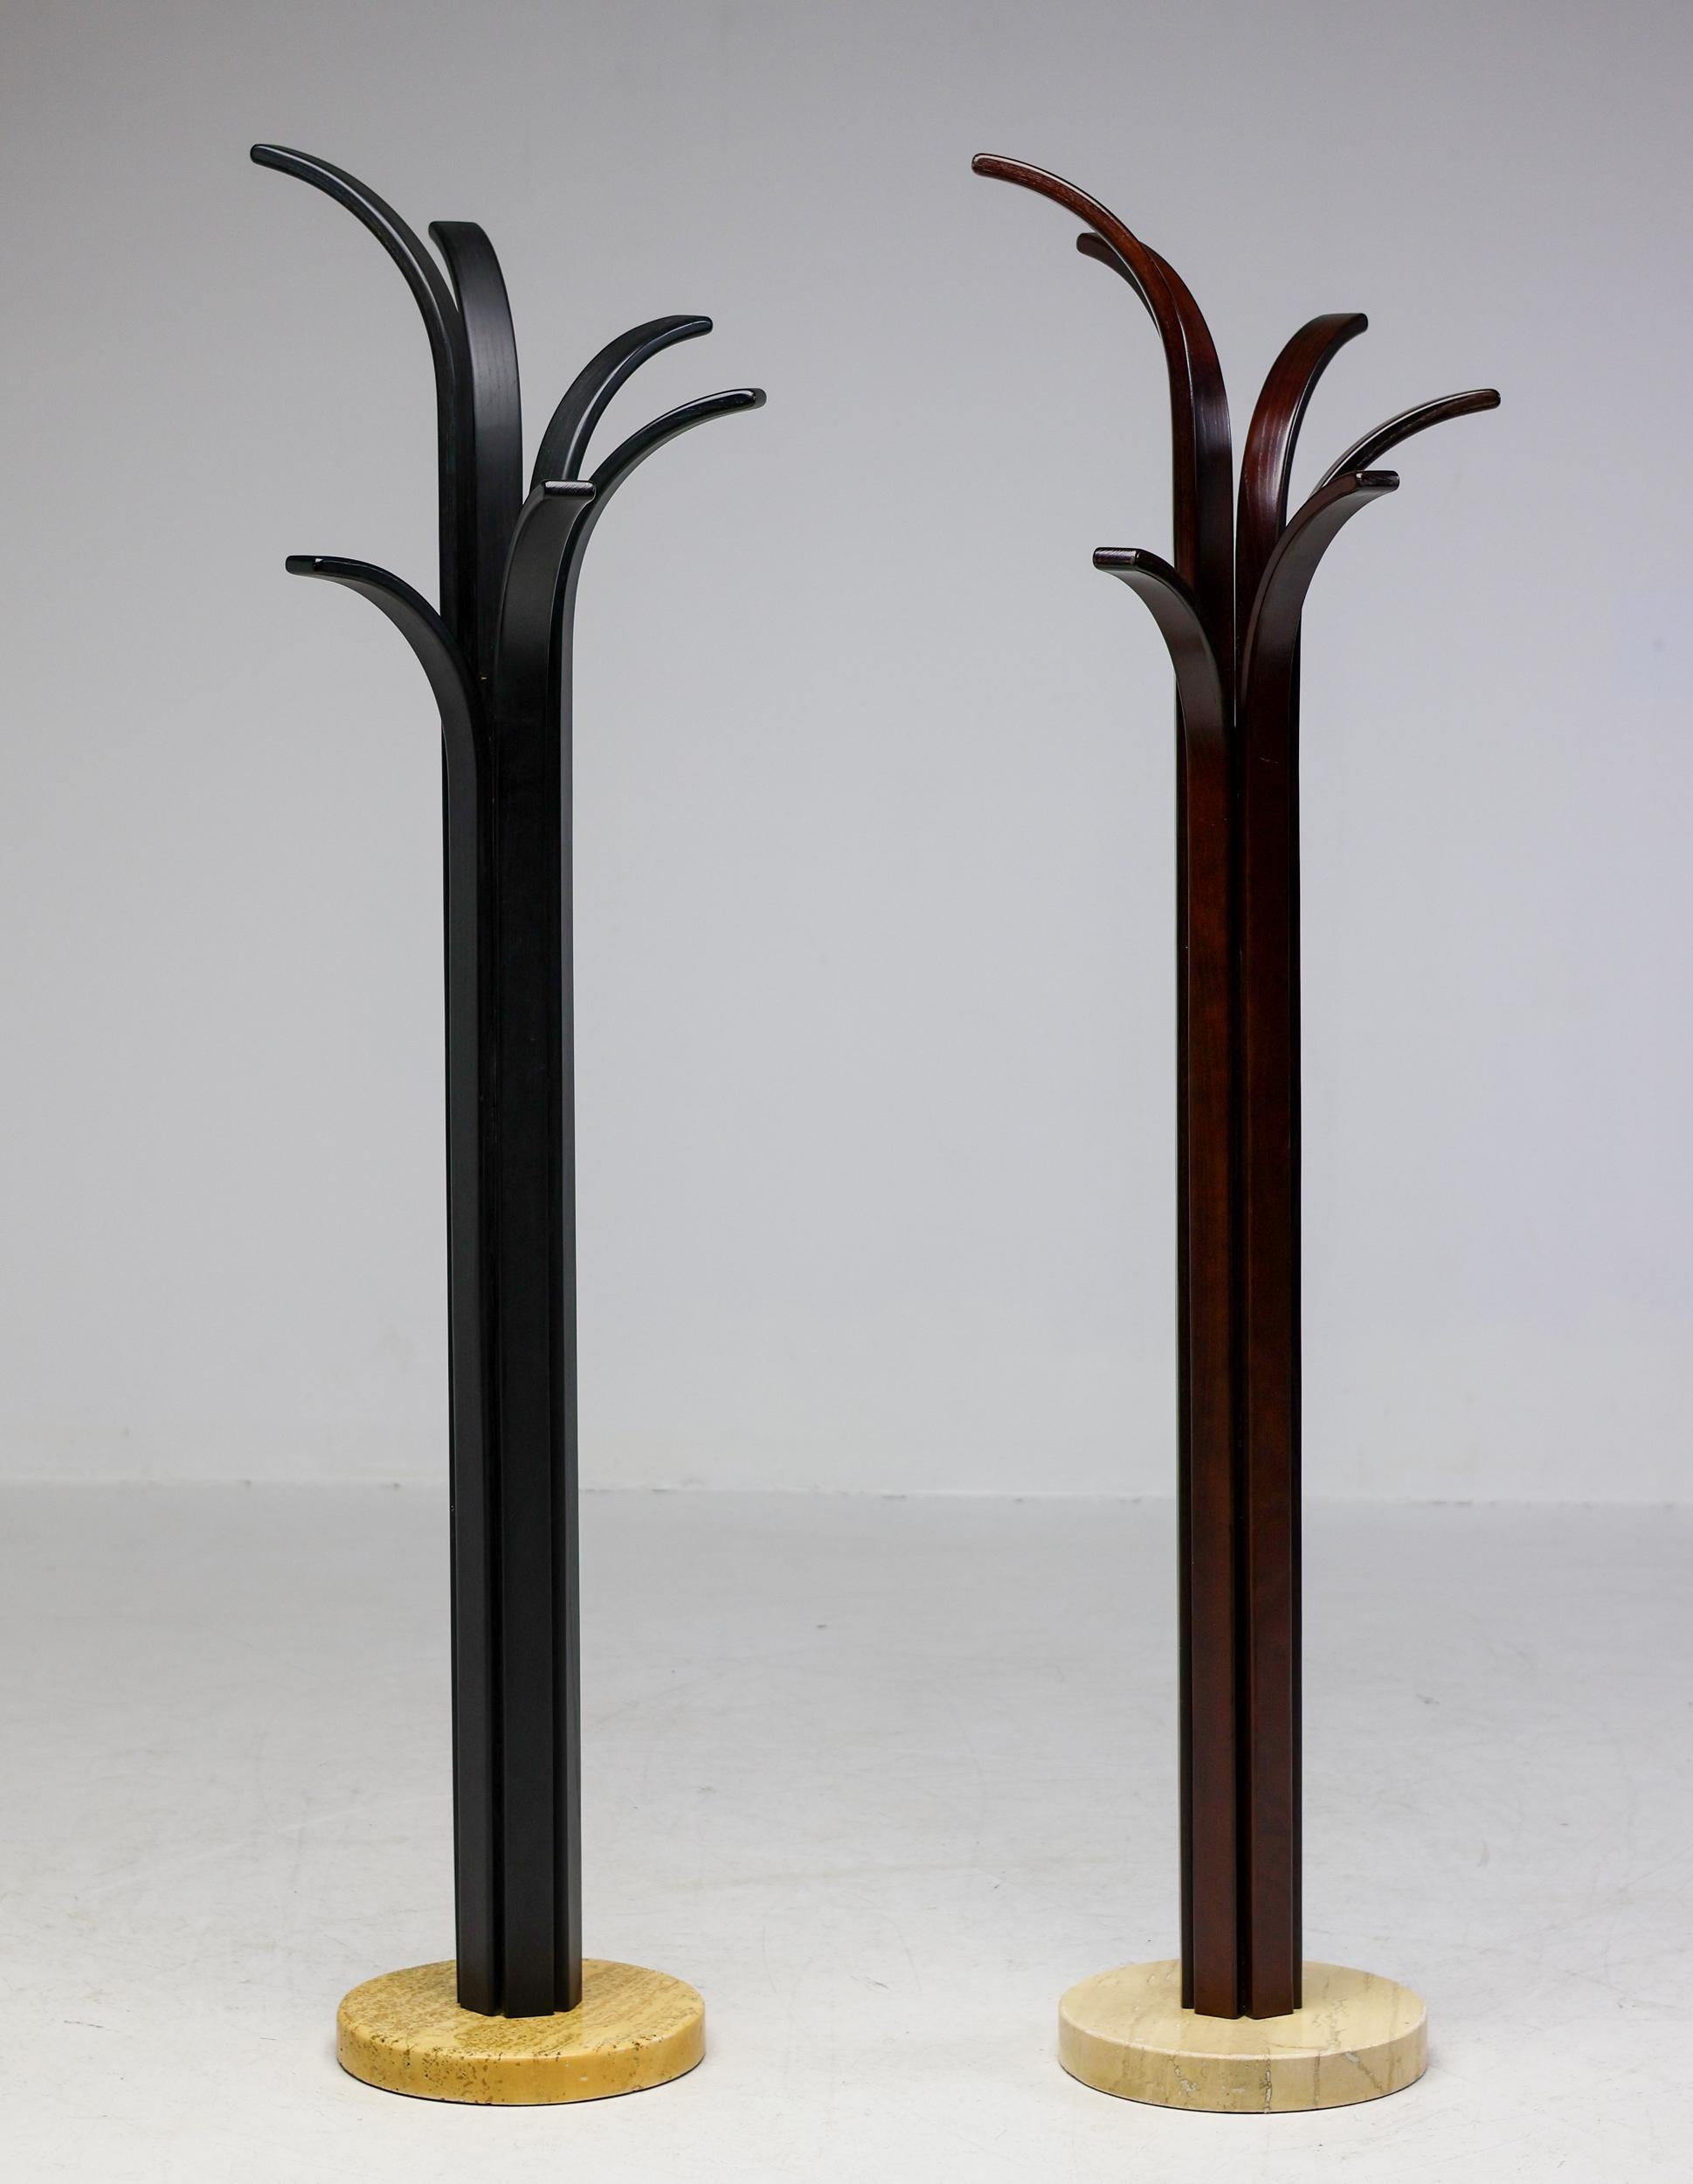 Pair of coat racks, excellent example of Italian Post Modern design. 
Bases in travertine, one rack in black lacquered plywood slates, the second one in dark brown lacquered plywood slates. Manufactured in Italy in the 1980s.
The plywood bases are